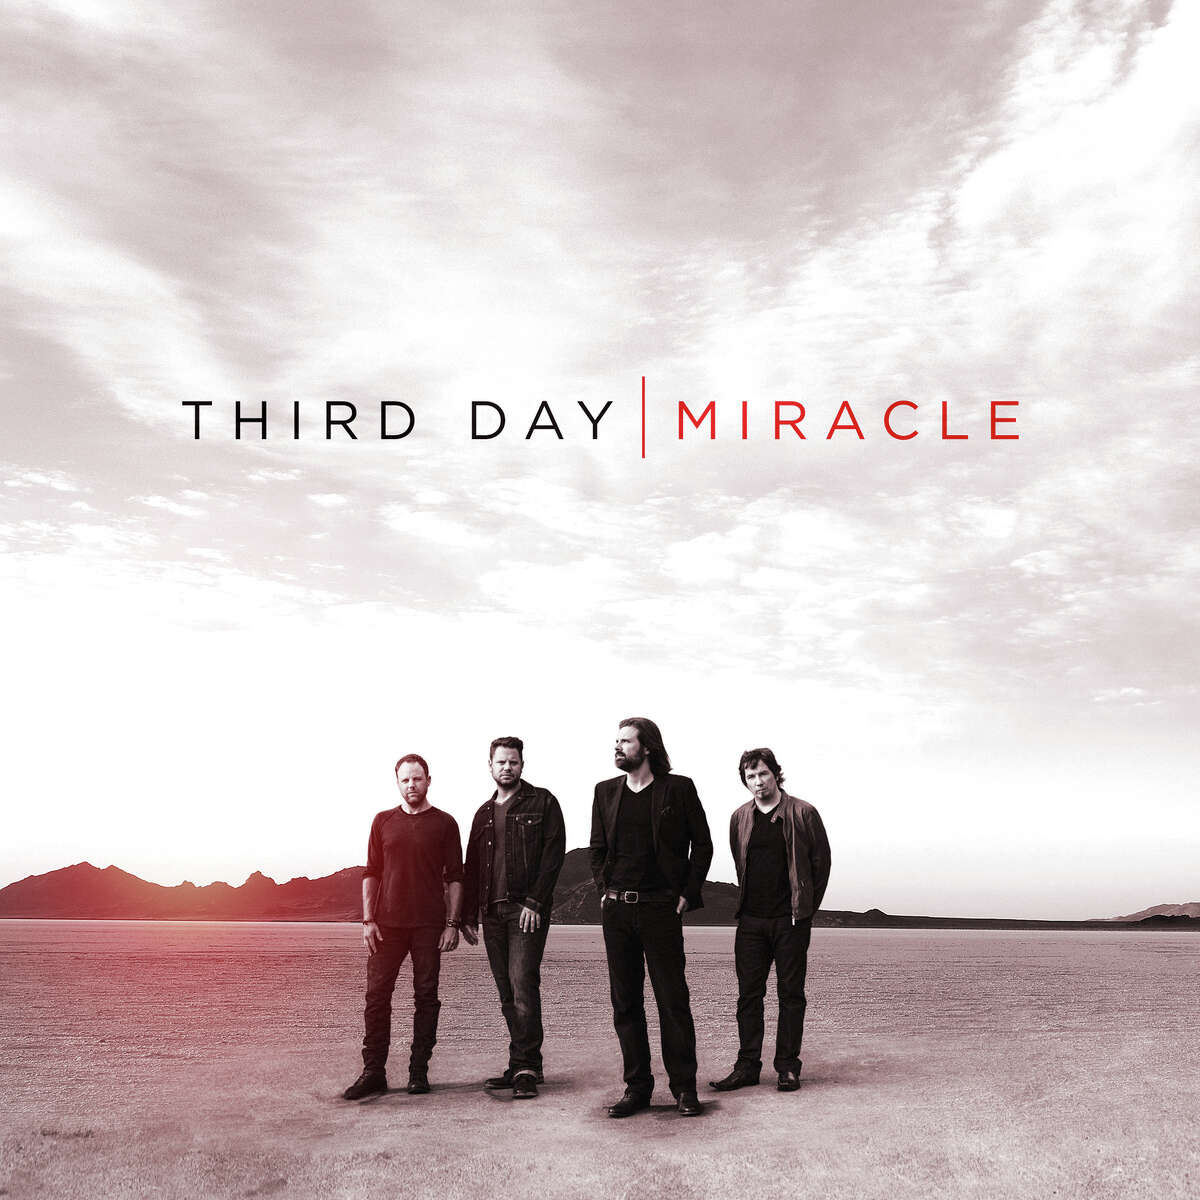 Christian contemporary band Third Day has released its 11th album, "Miracle."